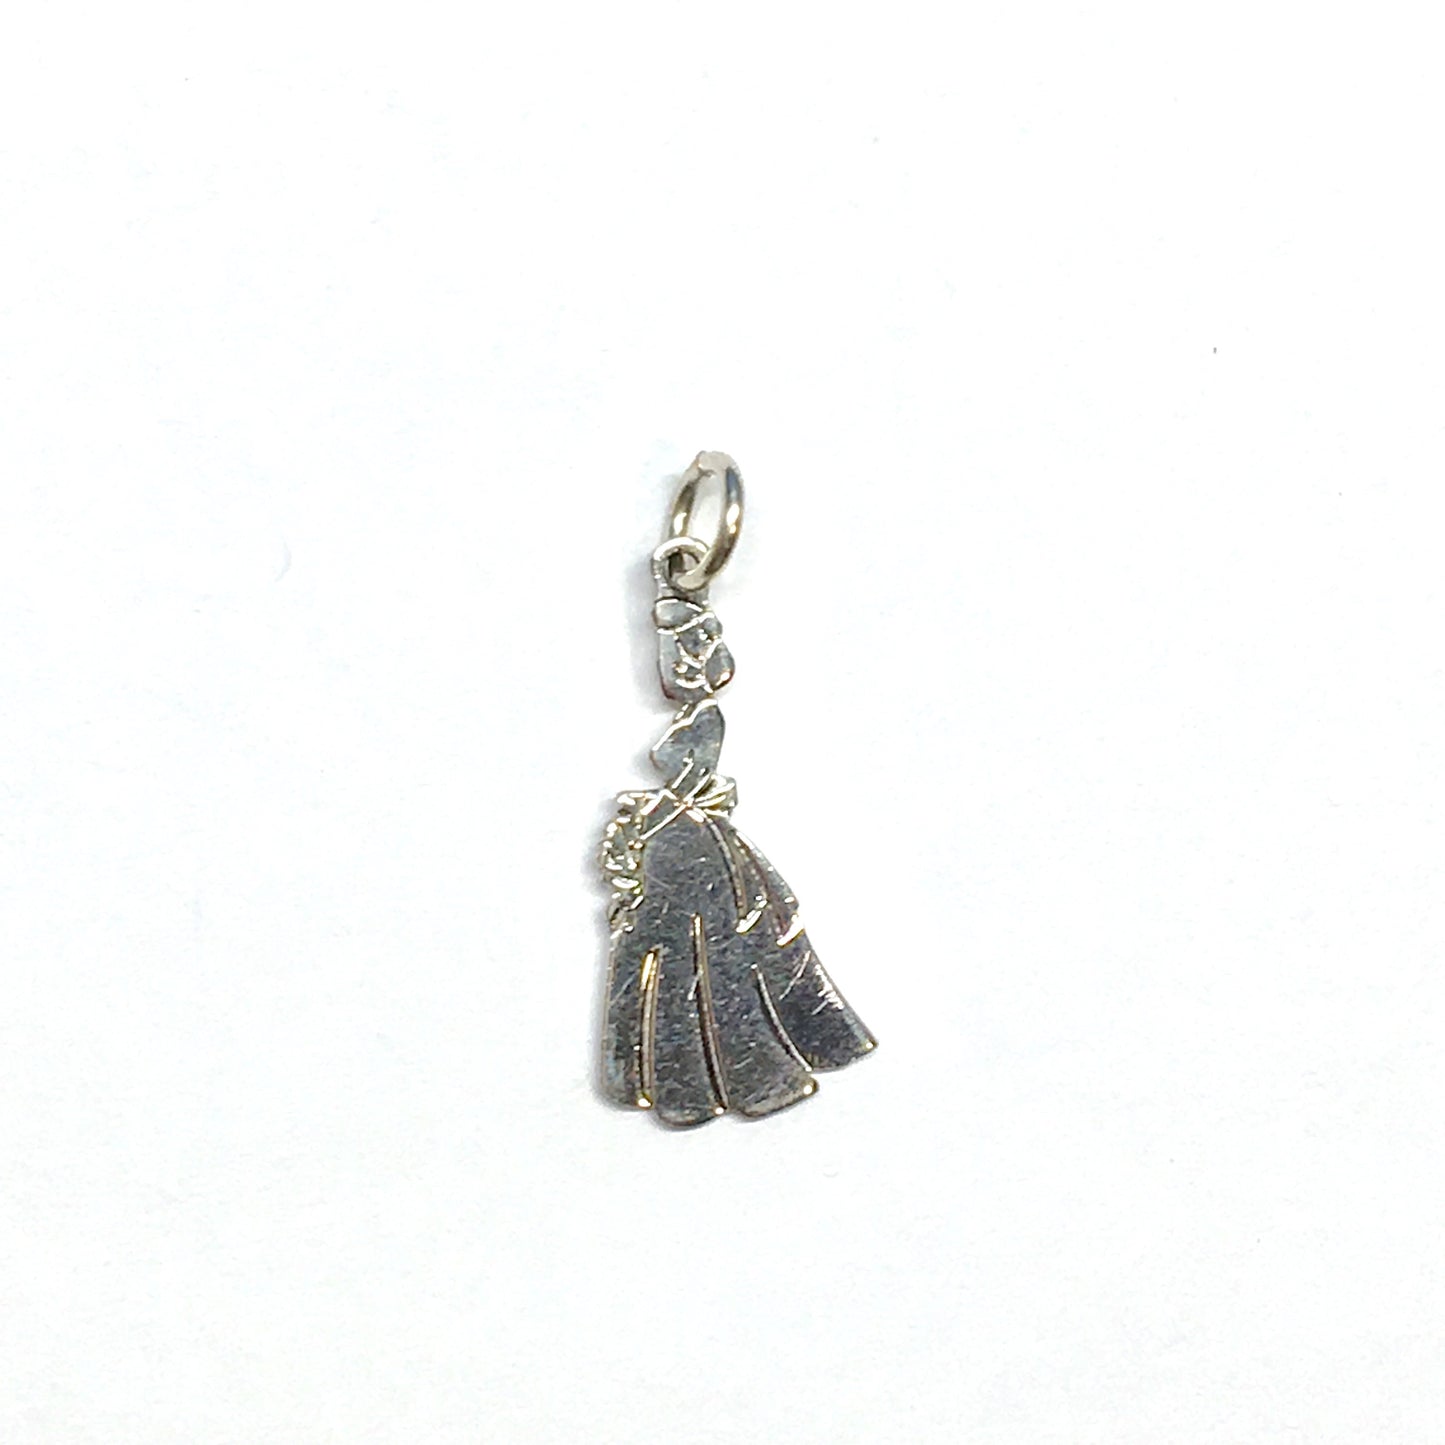 Charm - Vintage 30s Sterling Silver " The Proms " Historical Woman in Dress w/ Flowers Charm Pendant